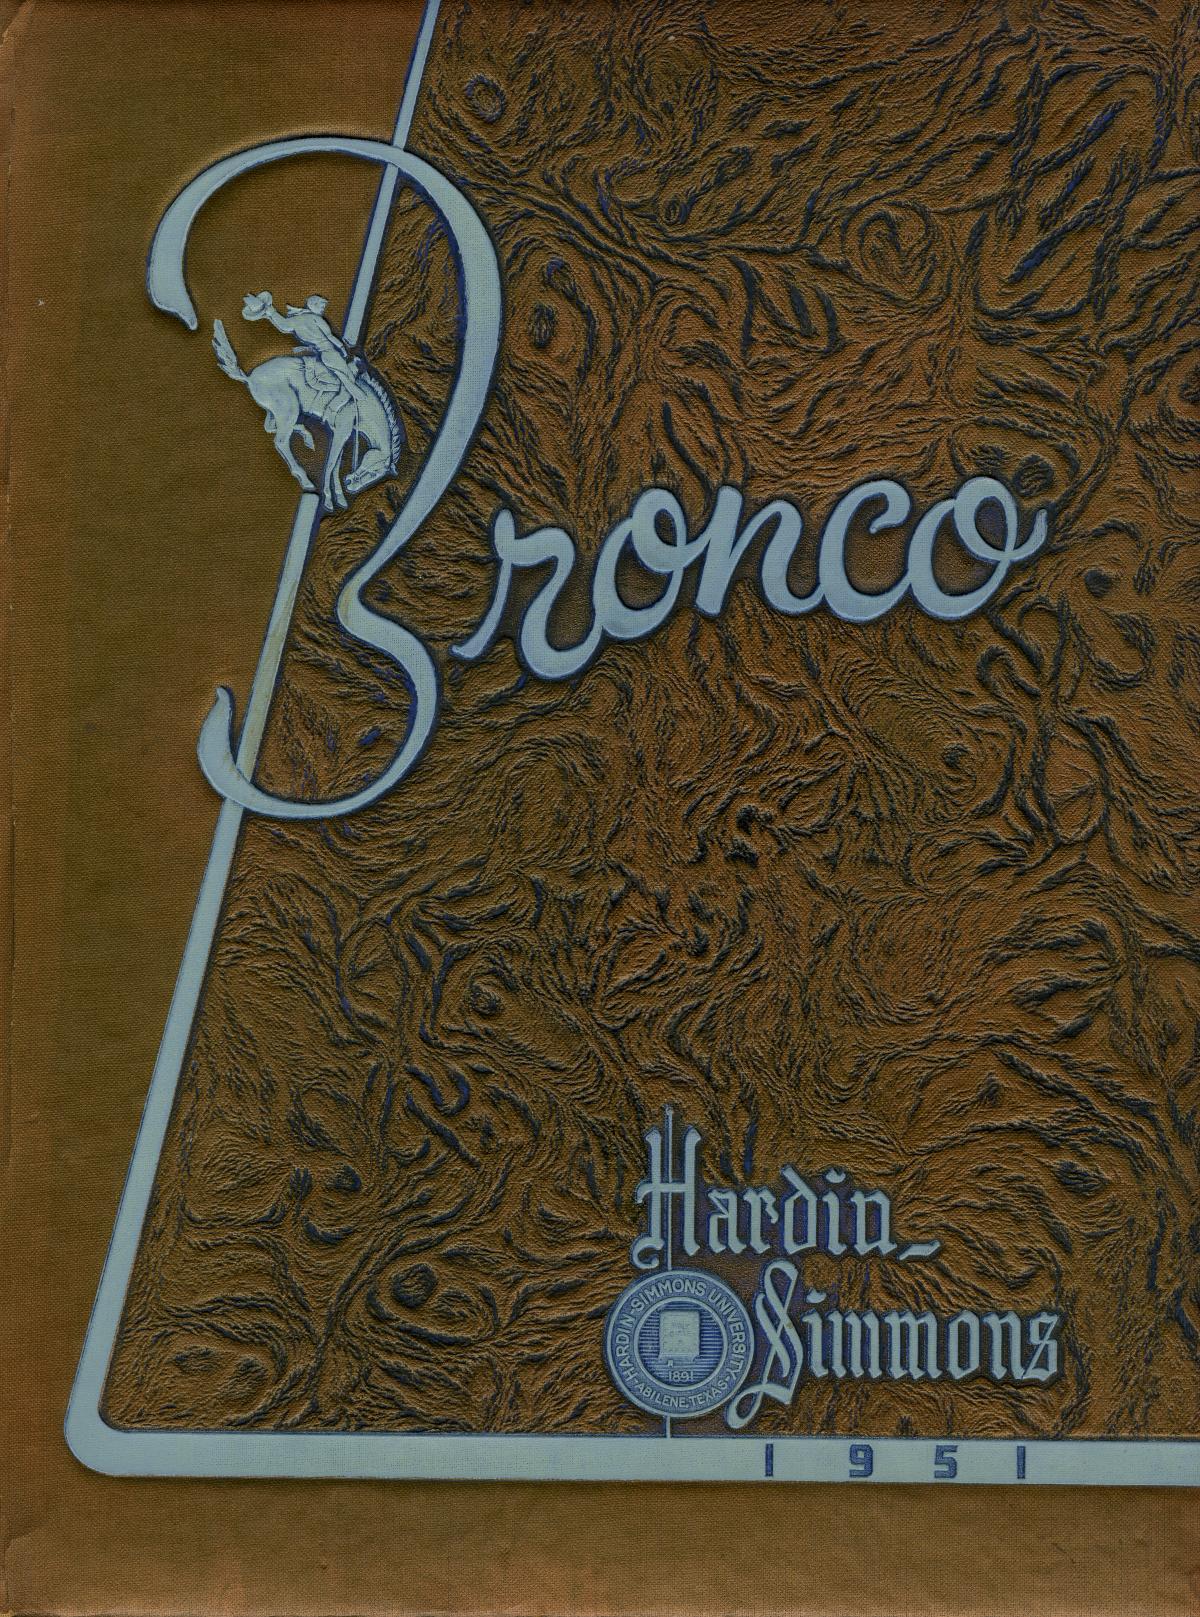 The Bronco, Yearbook of Hardin-Simmons University, 1951
                                                
                                                    Front Cover
                                                